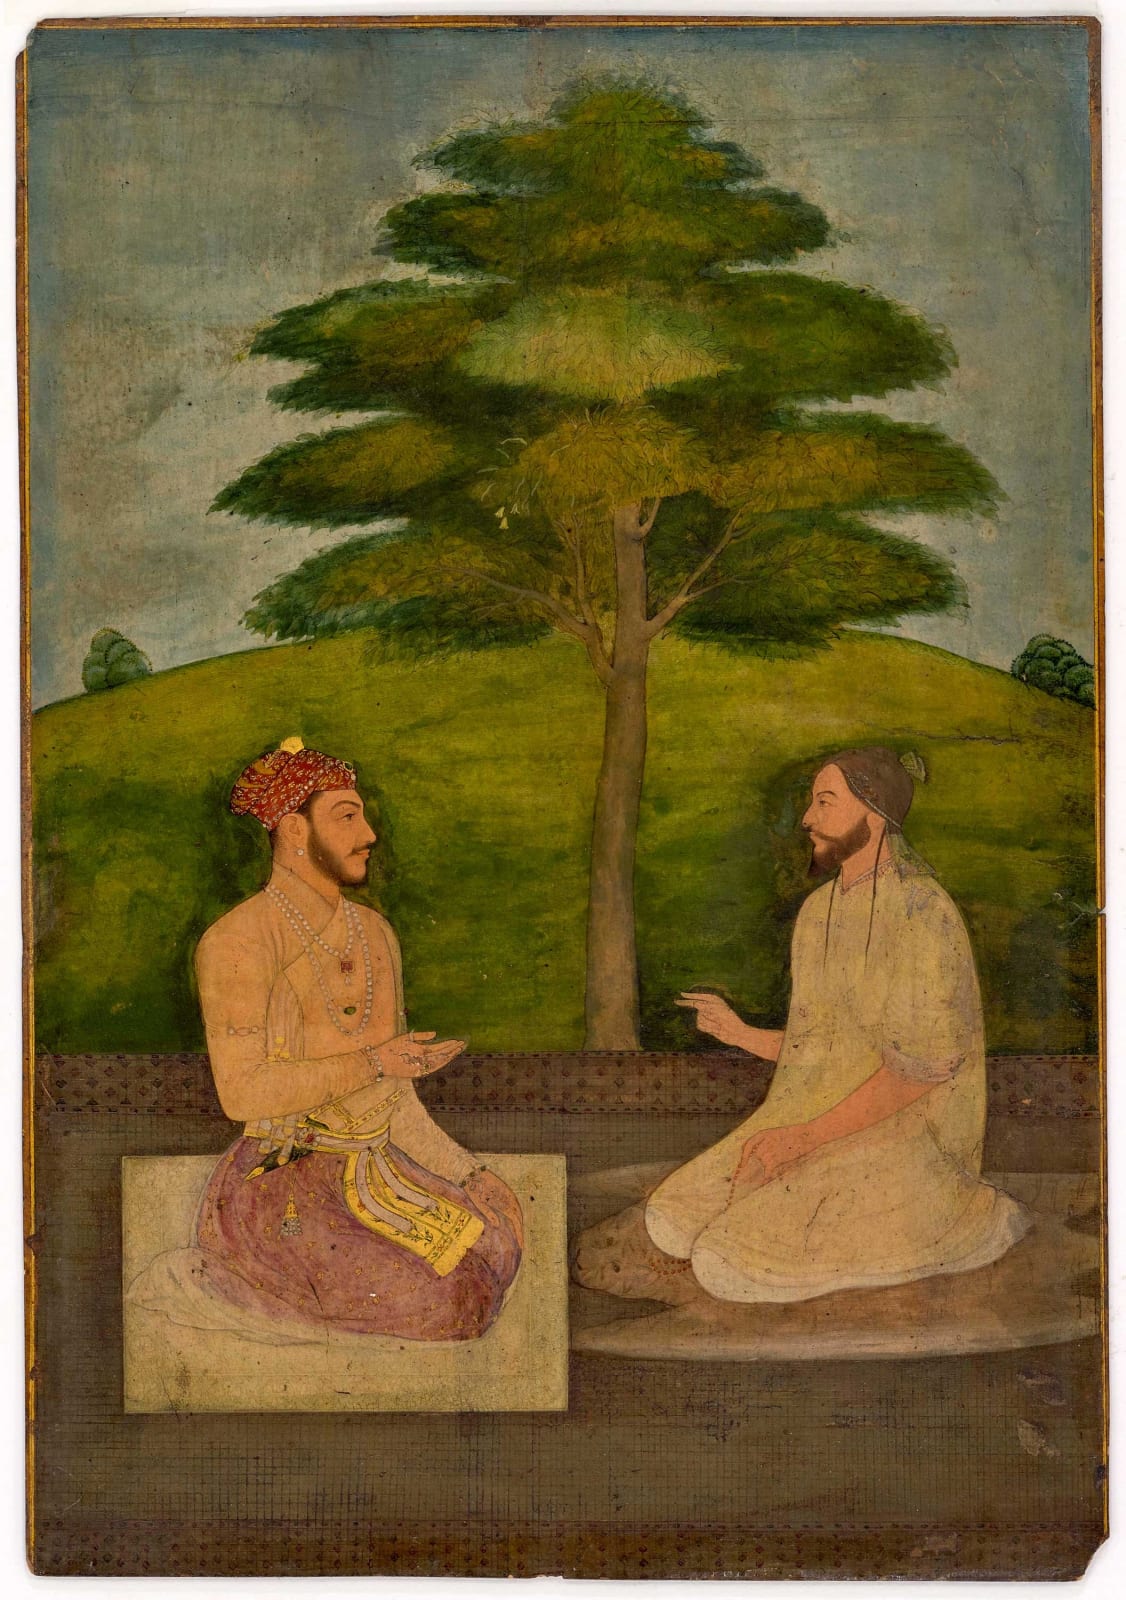 Prince Sulayman Shikoh in conversation with a scholar, Mughal, c. 1655, attributed to Chitarman